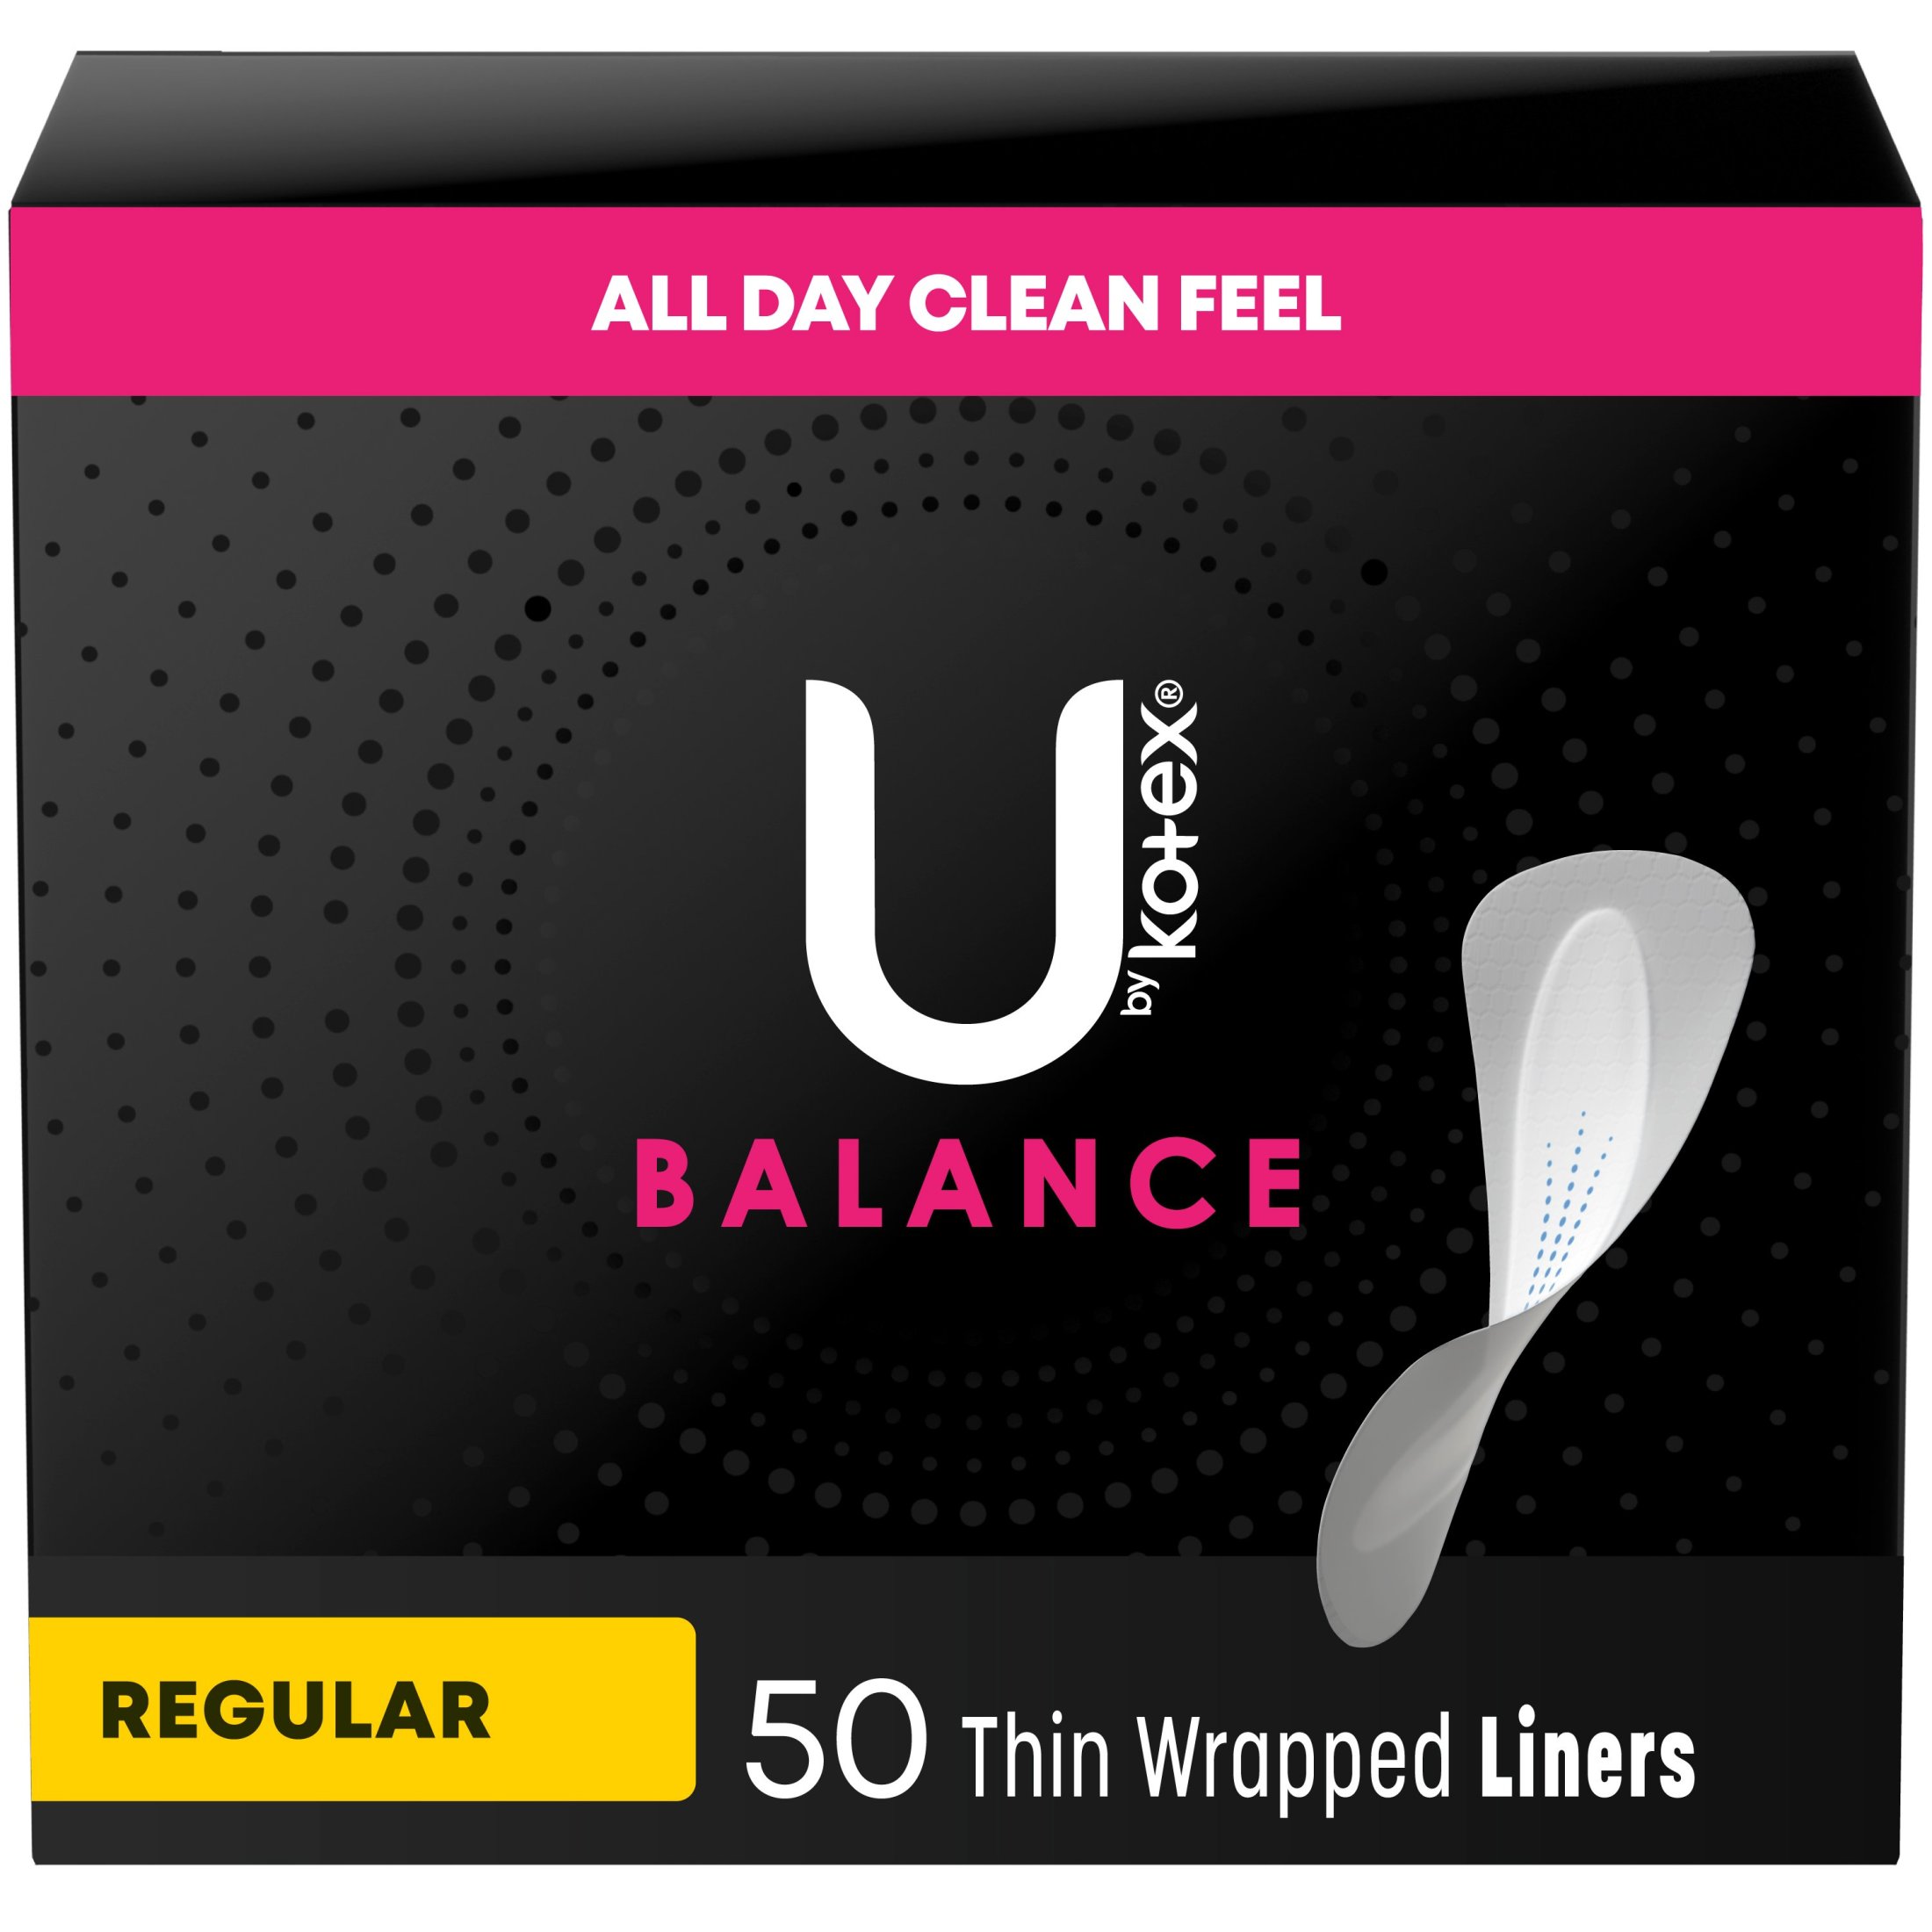 U by Kotex Balance Daily Wrapped Panty Liners, Light Absorbency, Regular Length, 50 Ct - image 1 of 9